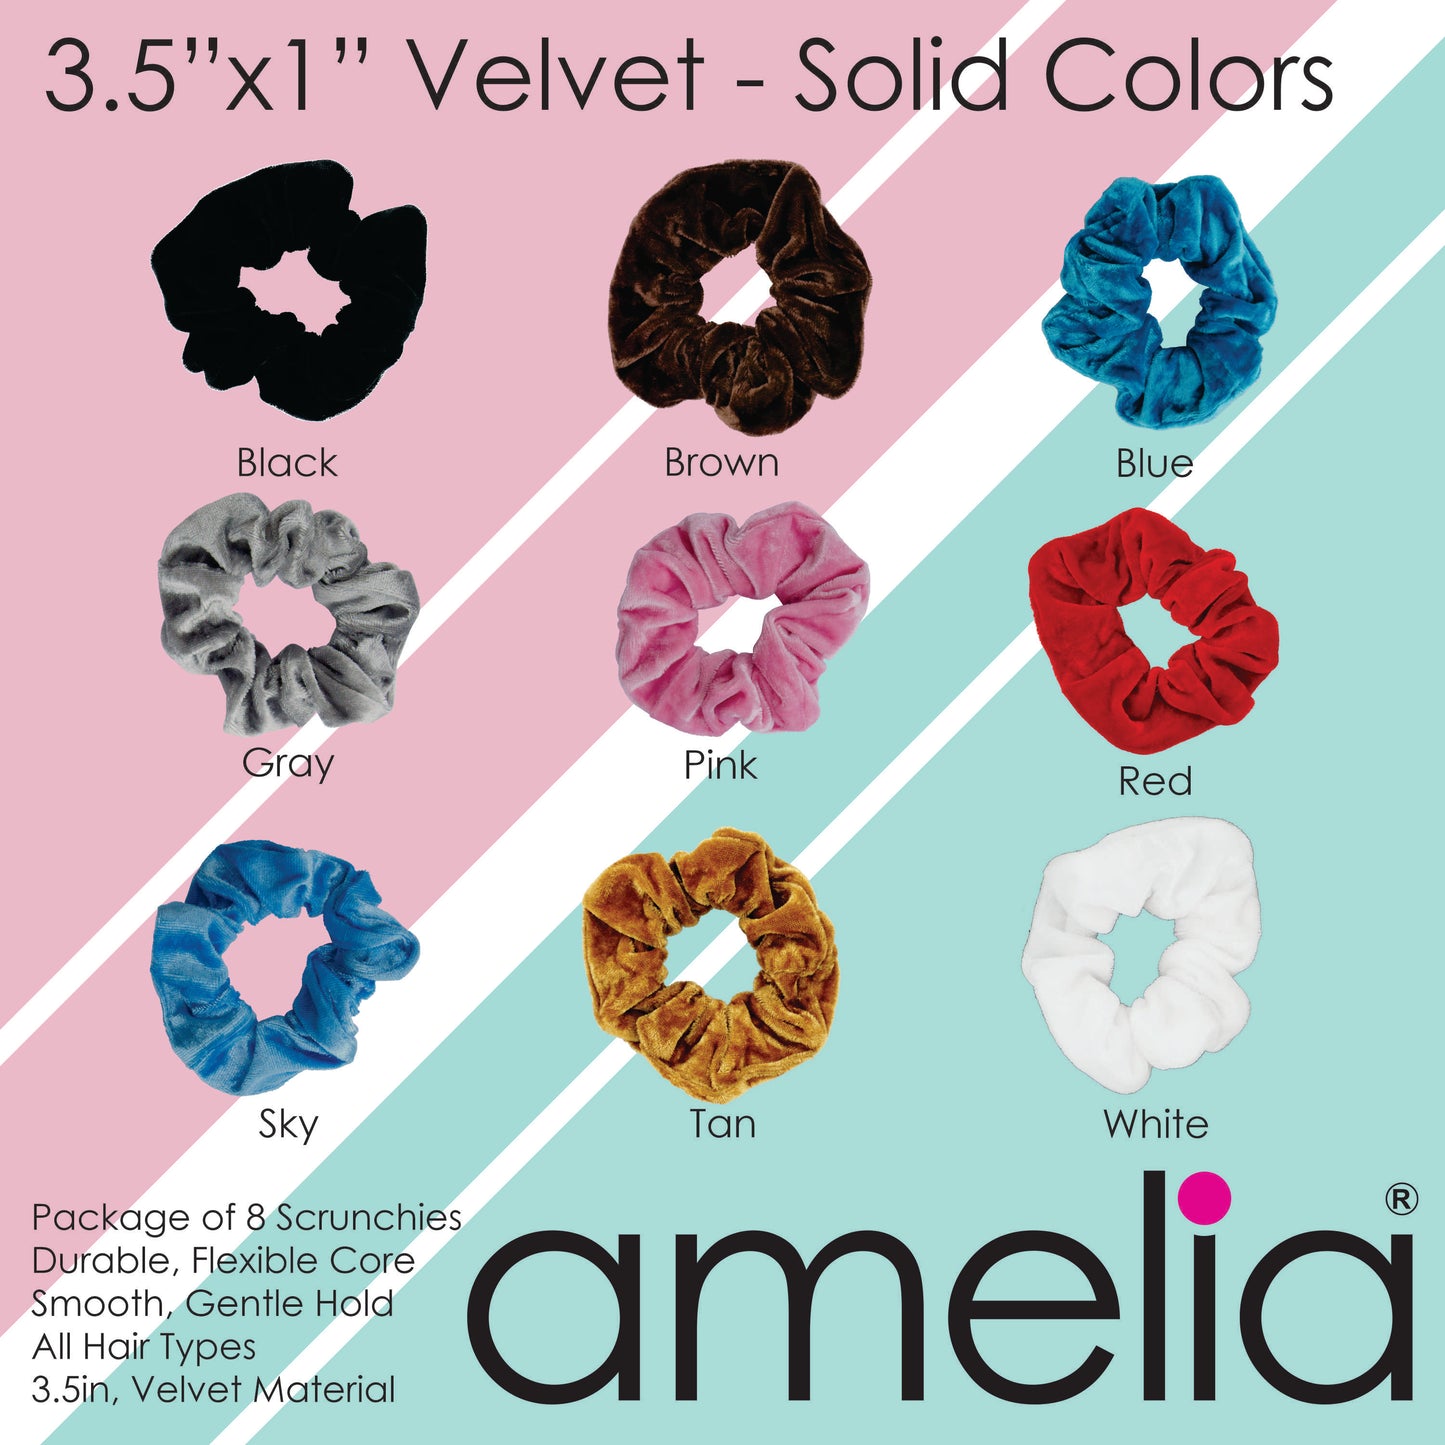 Amelia Beauty, Tan Velvet Scrunchies, 3.5in Diameter, Gentle on Hair, Strong Hold, No Snag, No Dents or Creases. 8 Pack